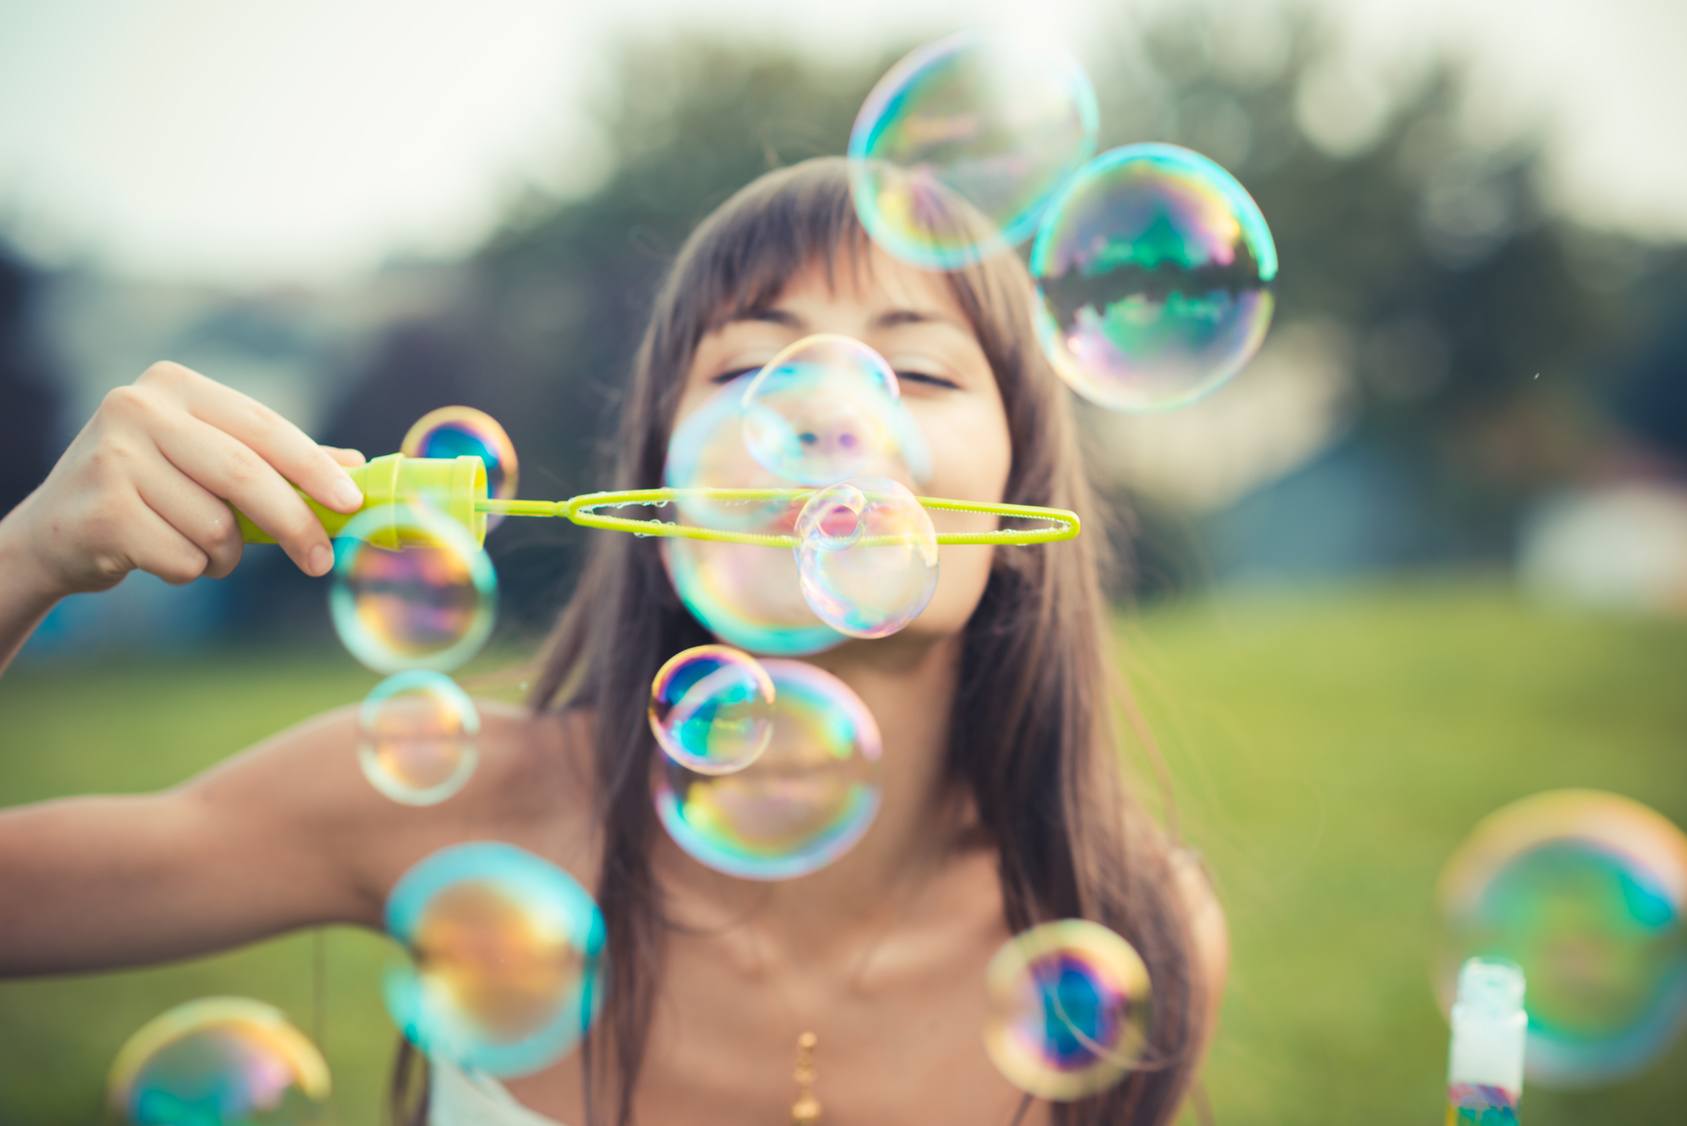 The 5 Secrets of Playful People